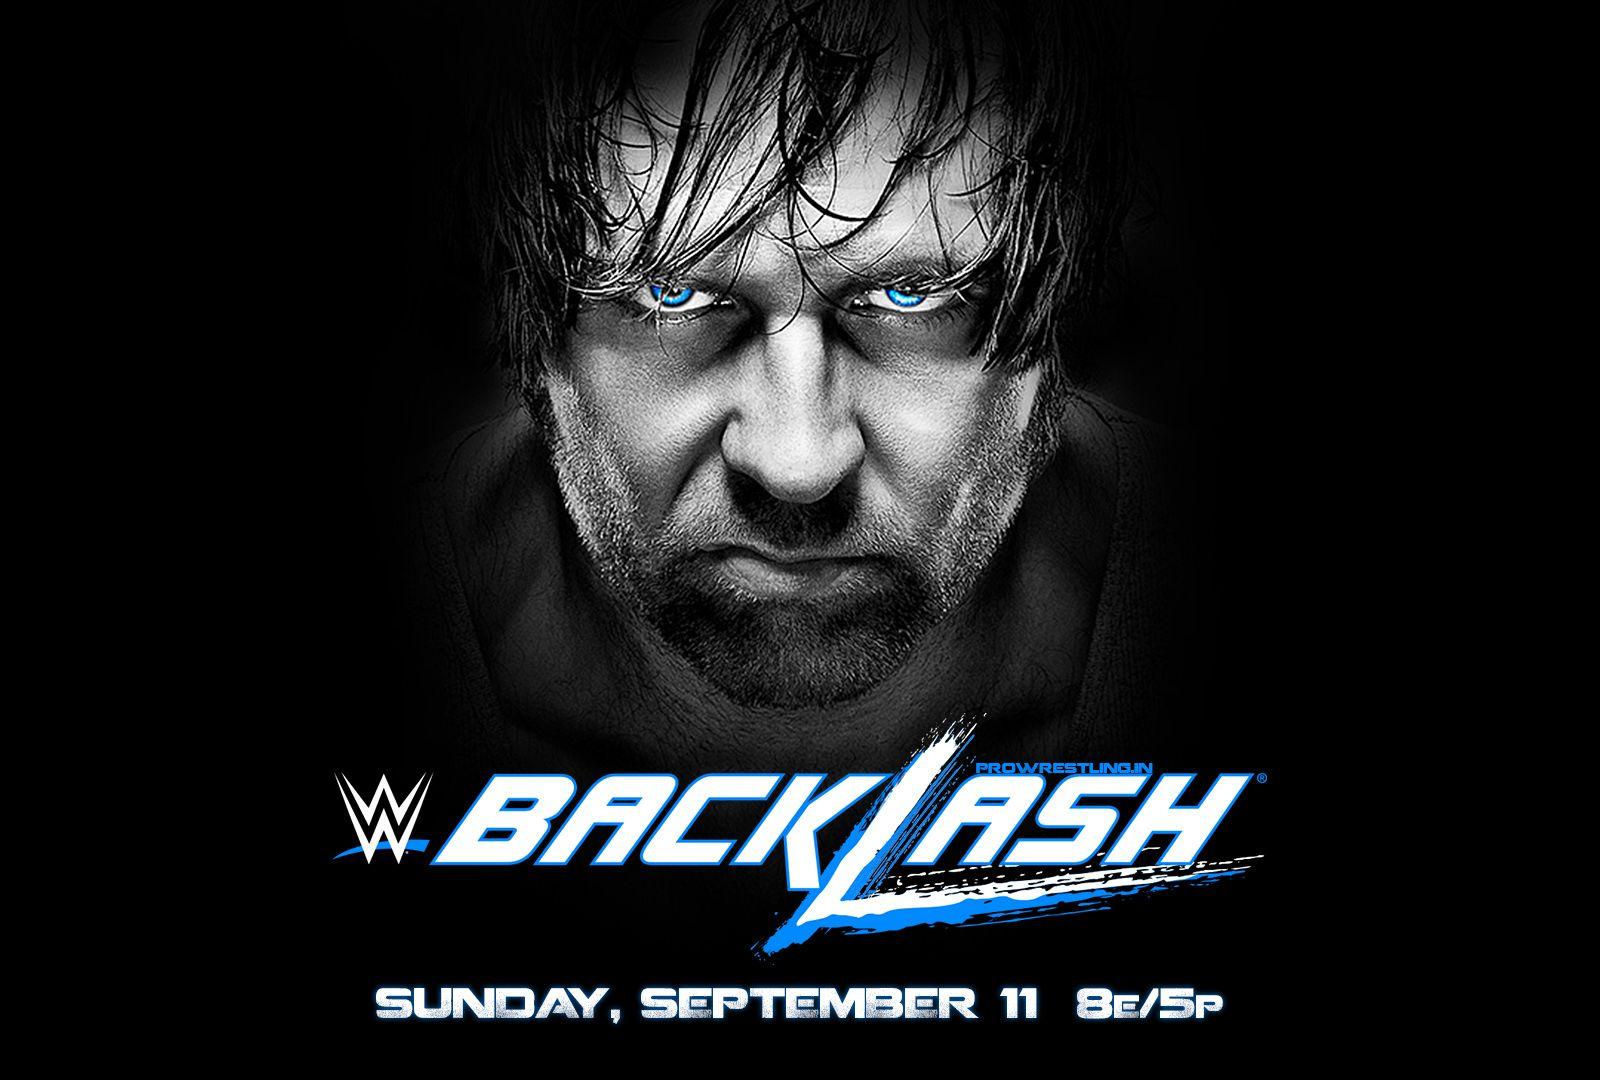 WWE Backlash 2016 Official HQ Wallpaper Download feat. Dean